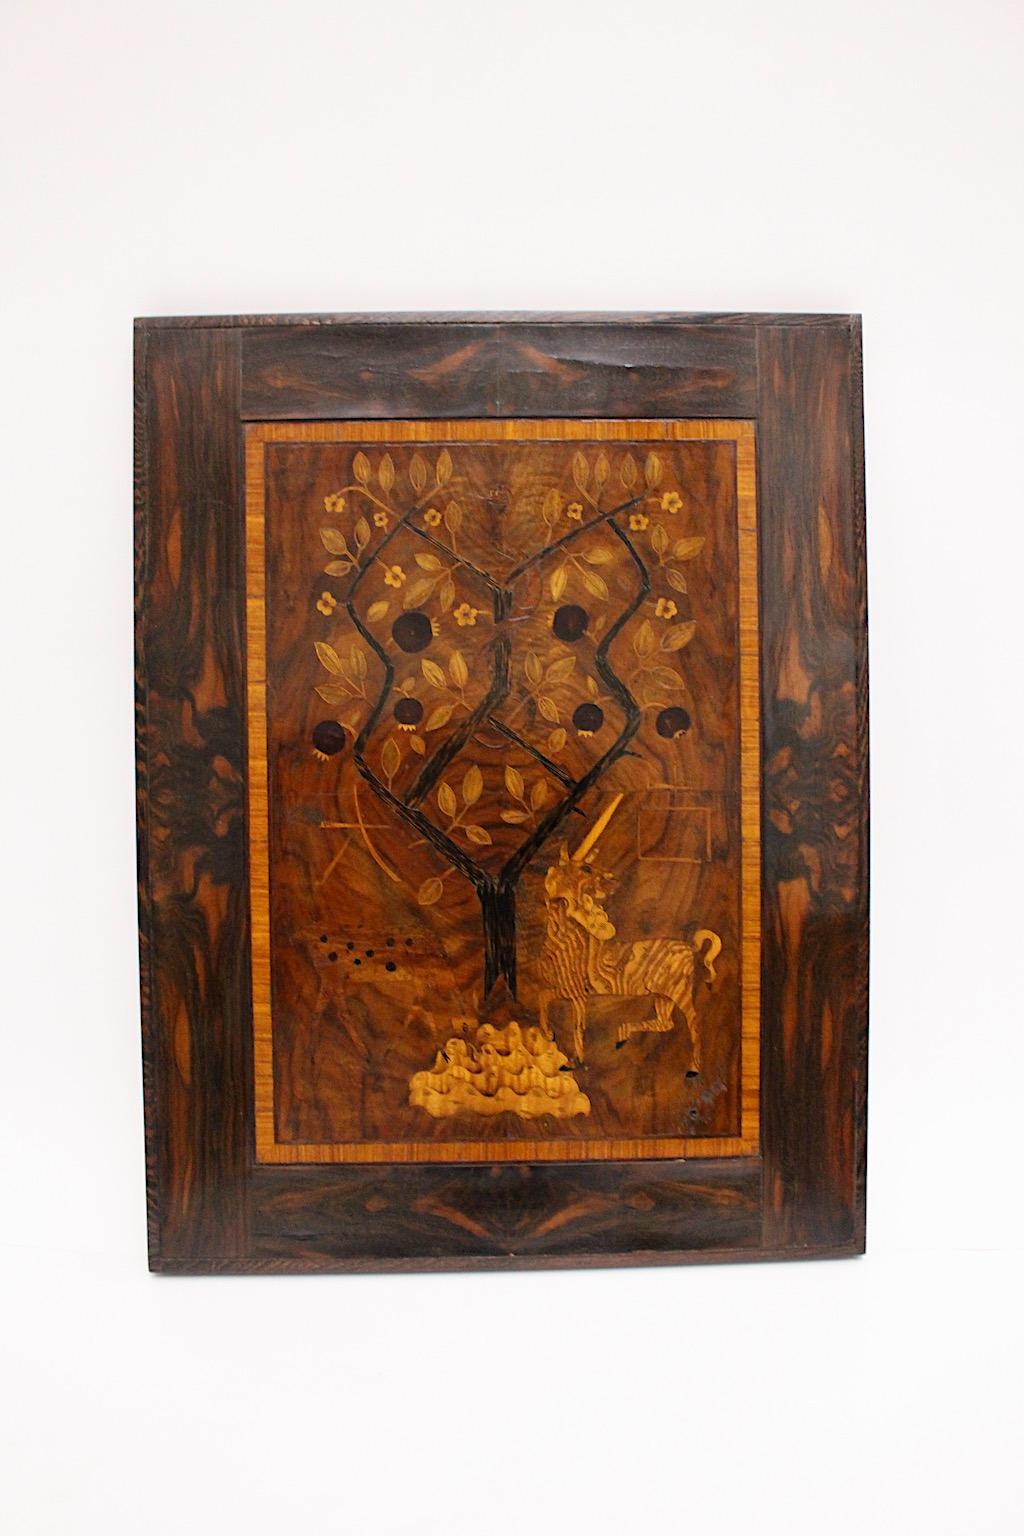 Art Deco vintage wood inlaid picture or wall panel in the of style of Victor Lurje 1920s, Austria.
A stunning wooden inlaid picture in the style of Victor Lurje 1920s with fairytale motif unicorn and fabulous animal under pomegranate tree in the